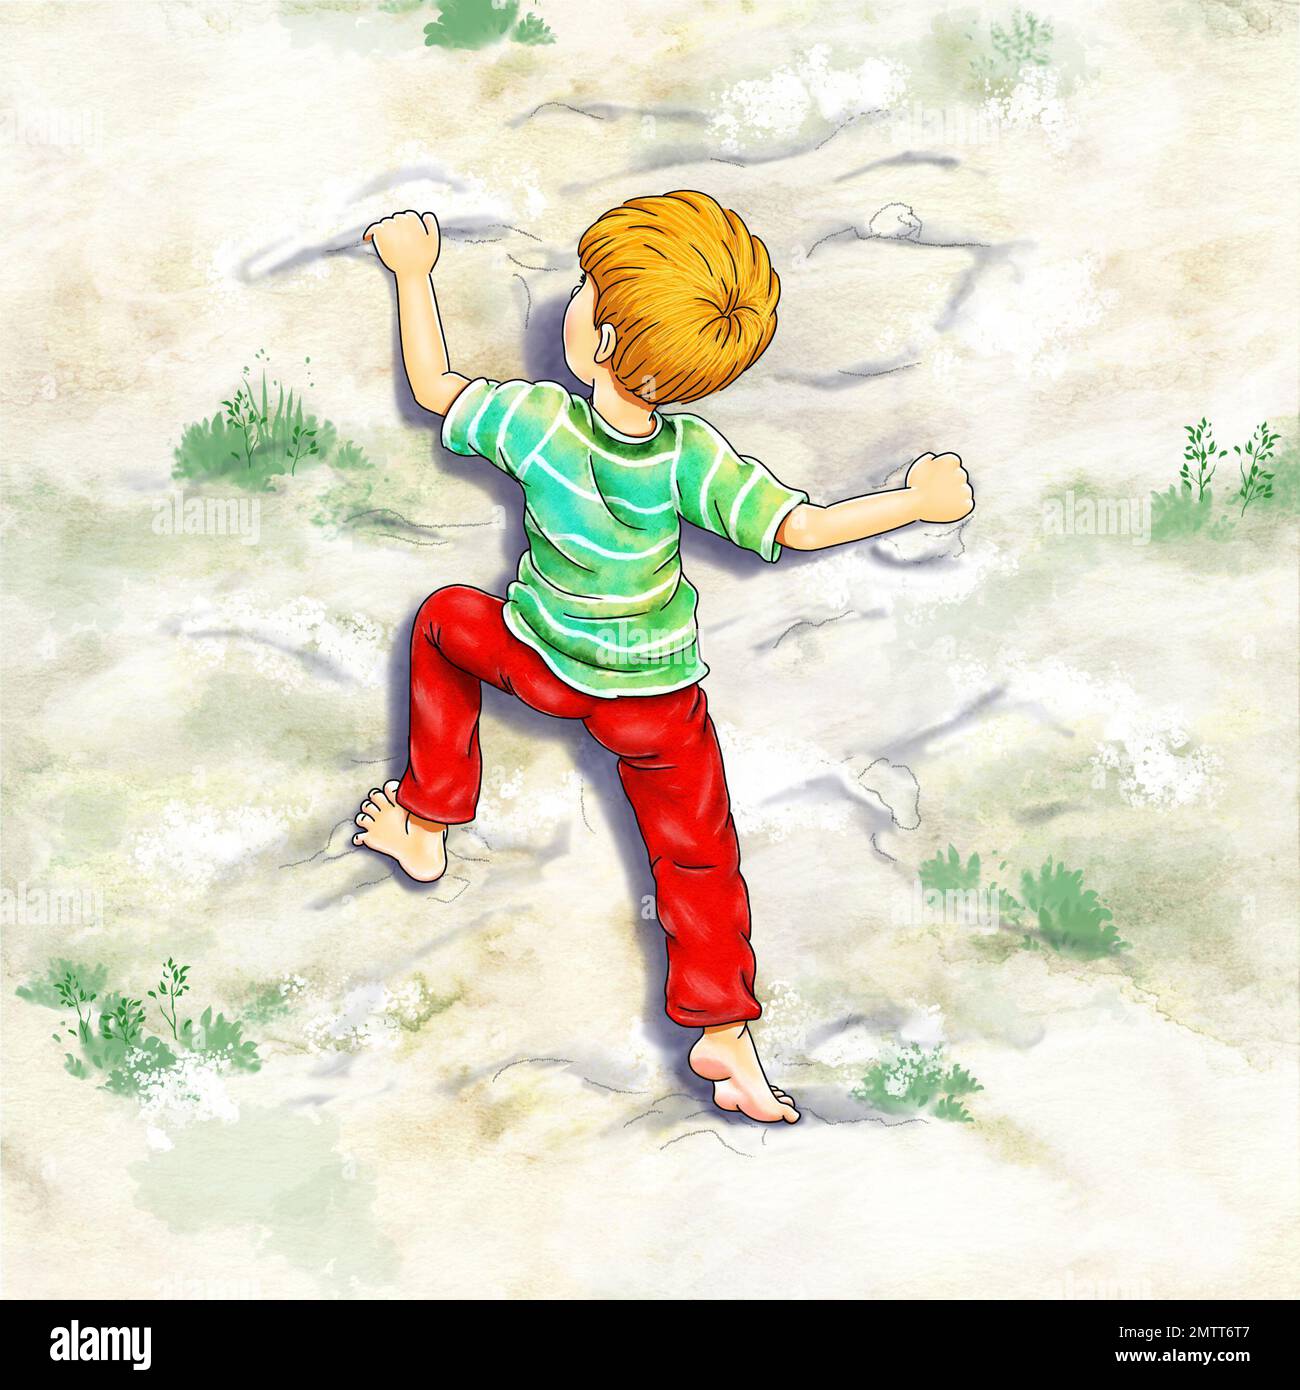 A boy climbing up something barefoot. Holding on with his hands and feet, he looks up for the next step. Climbers try dangerously, strong play Stock Photo